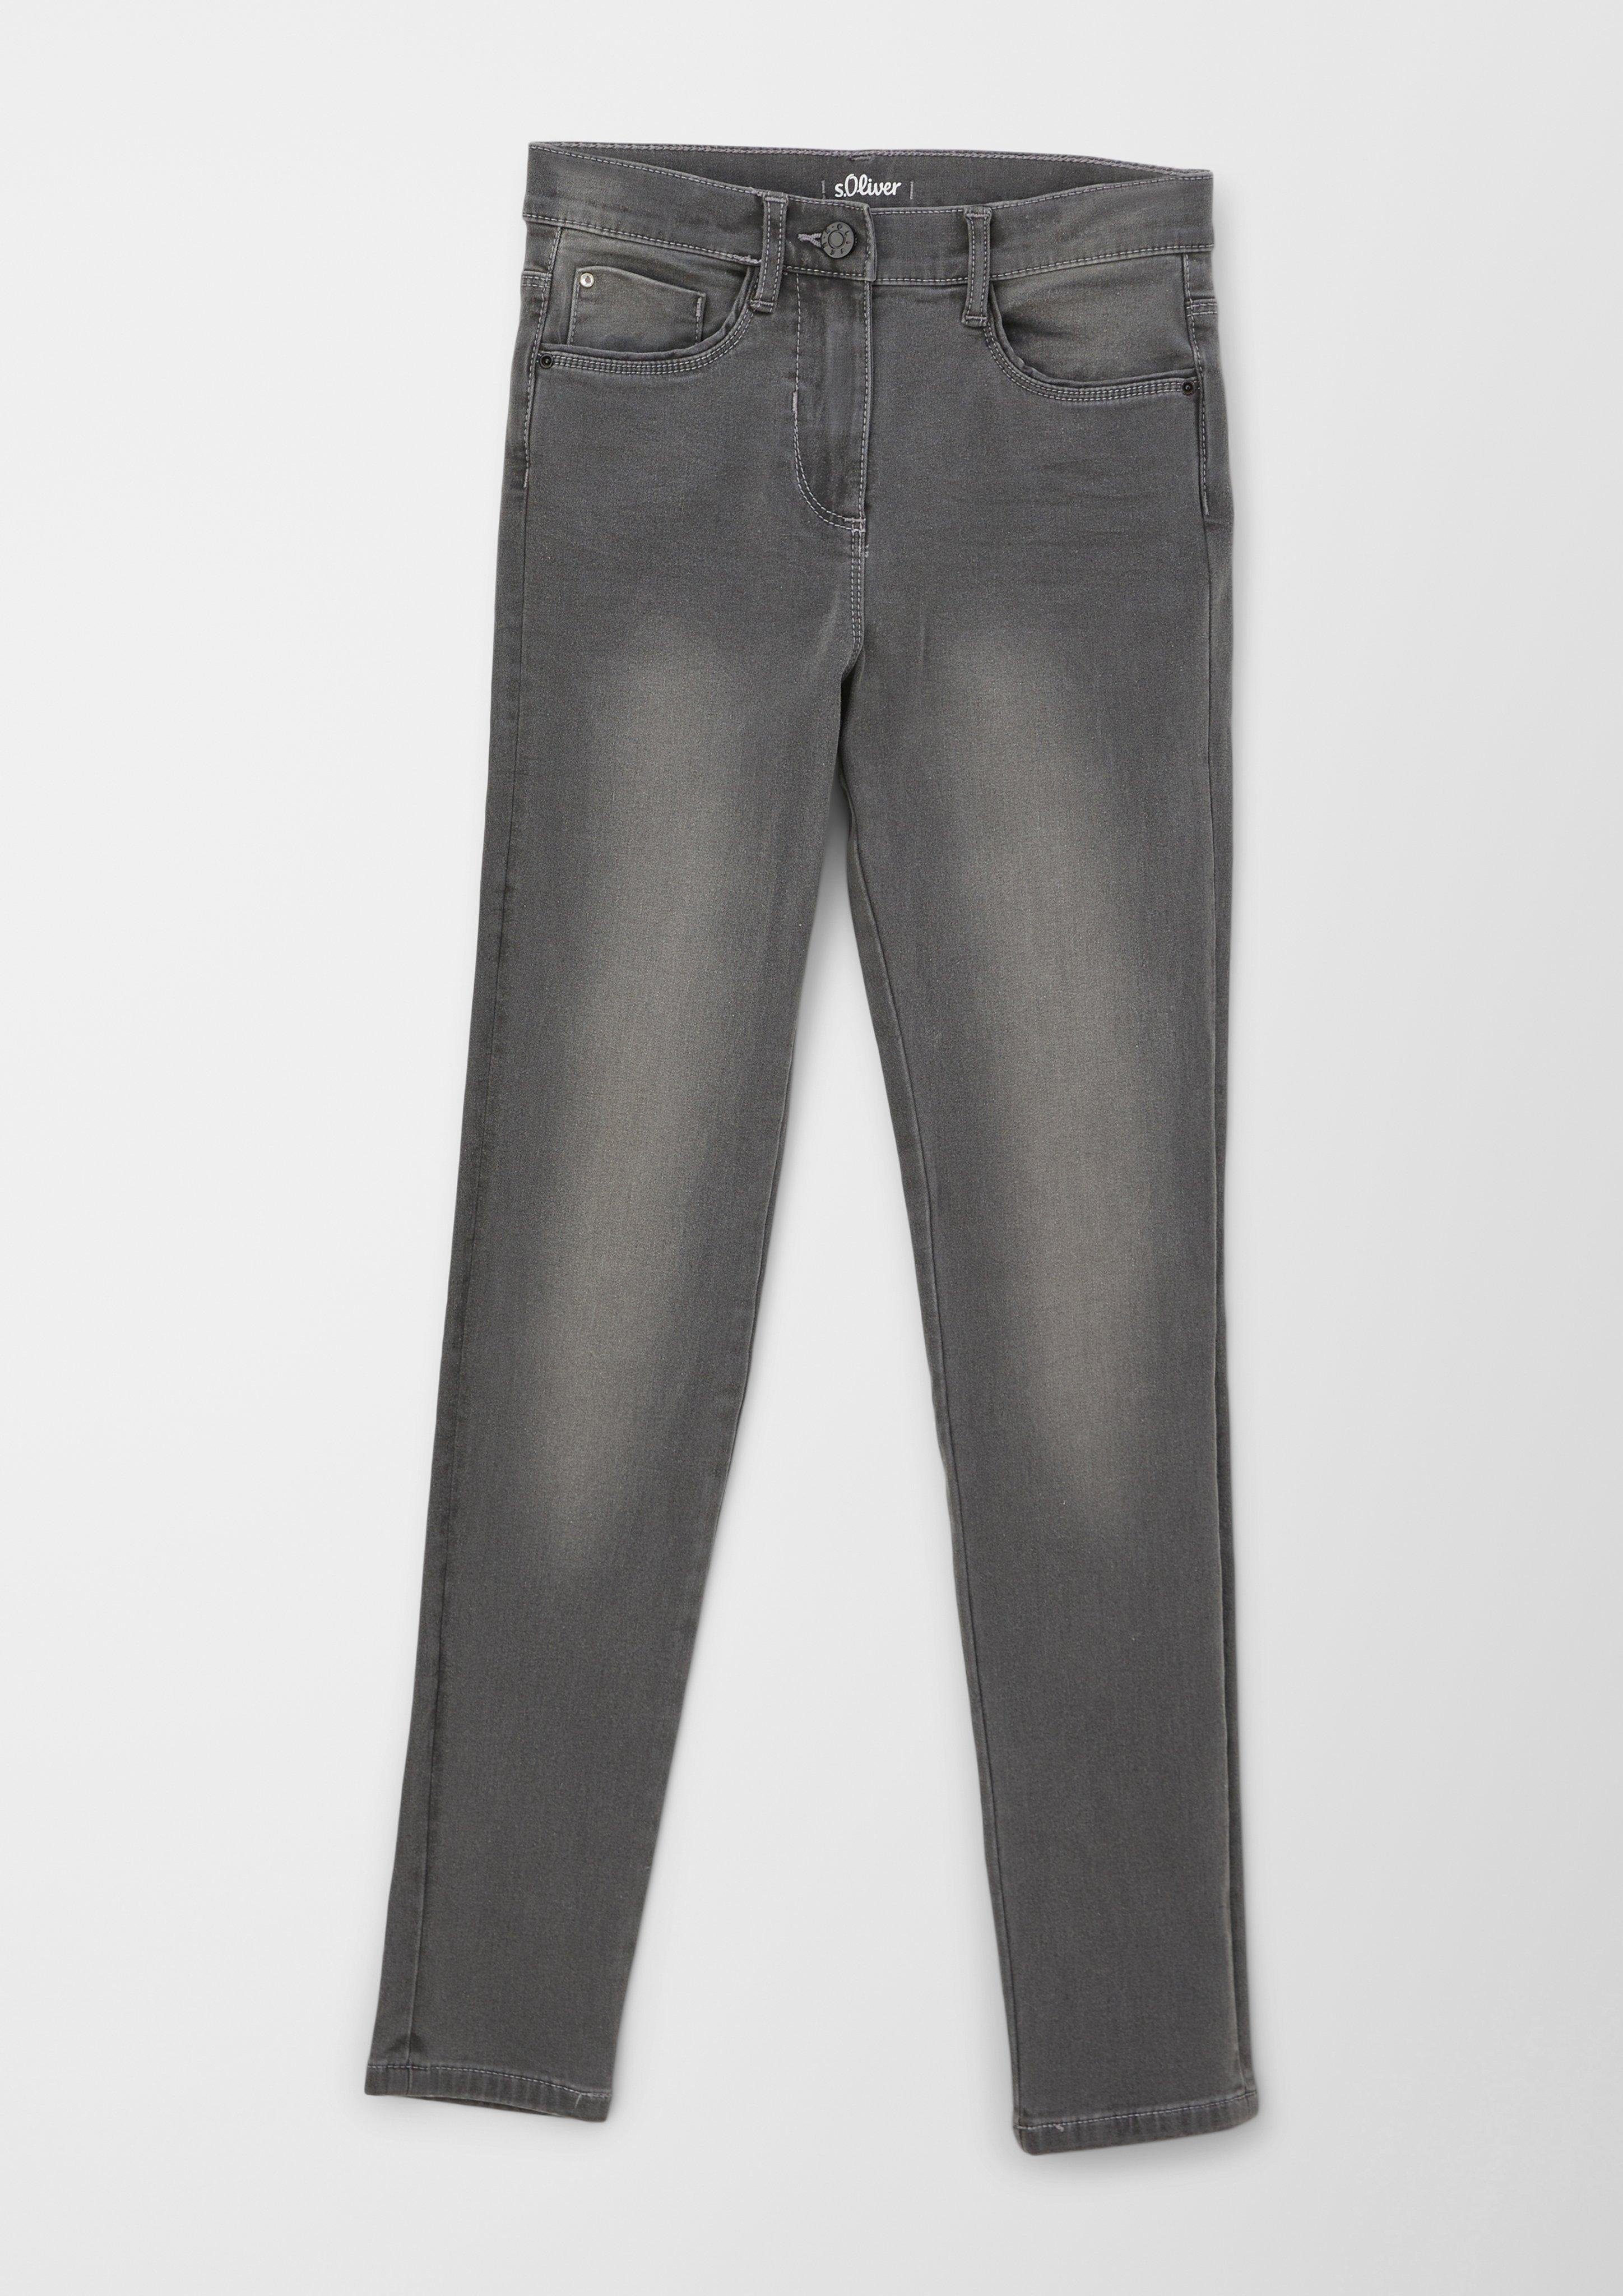 Suri Skinny Skinny High / Fit s.Oliver Stoffhose Leg Rise Jeans / Skinny / Waschung